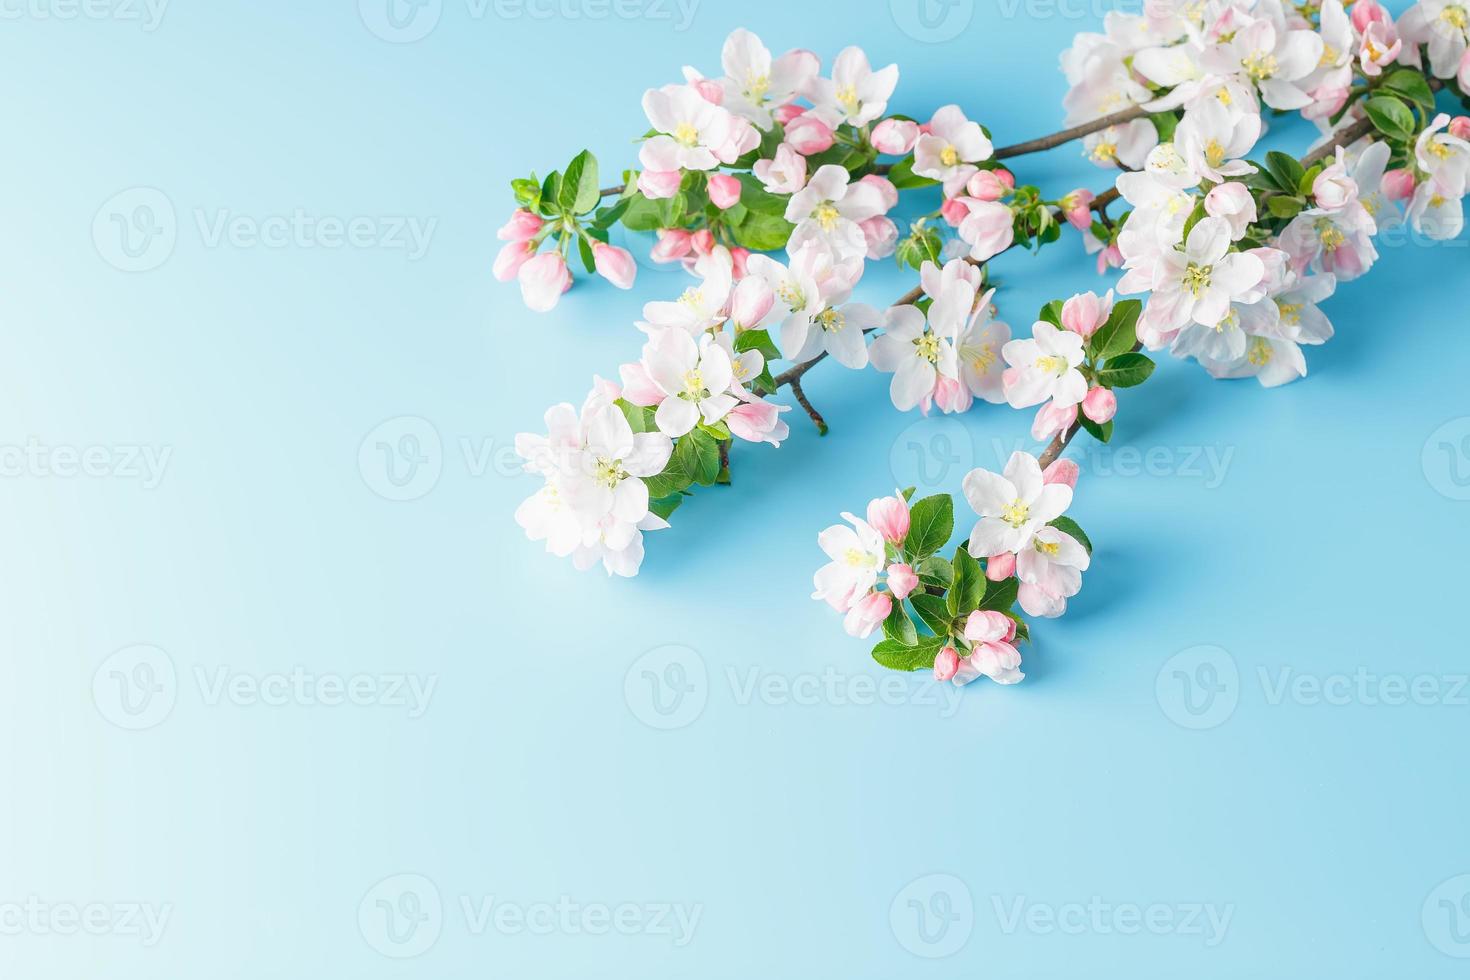 Blooming spring sakura on a blue background with space for a greeting message. The concept of spring and mother's day. Beautiful delicate pink cherry flowers in springtime photo